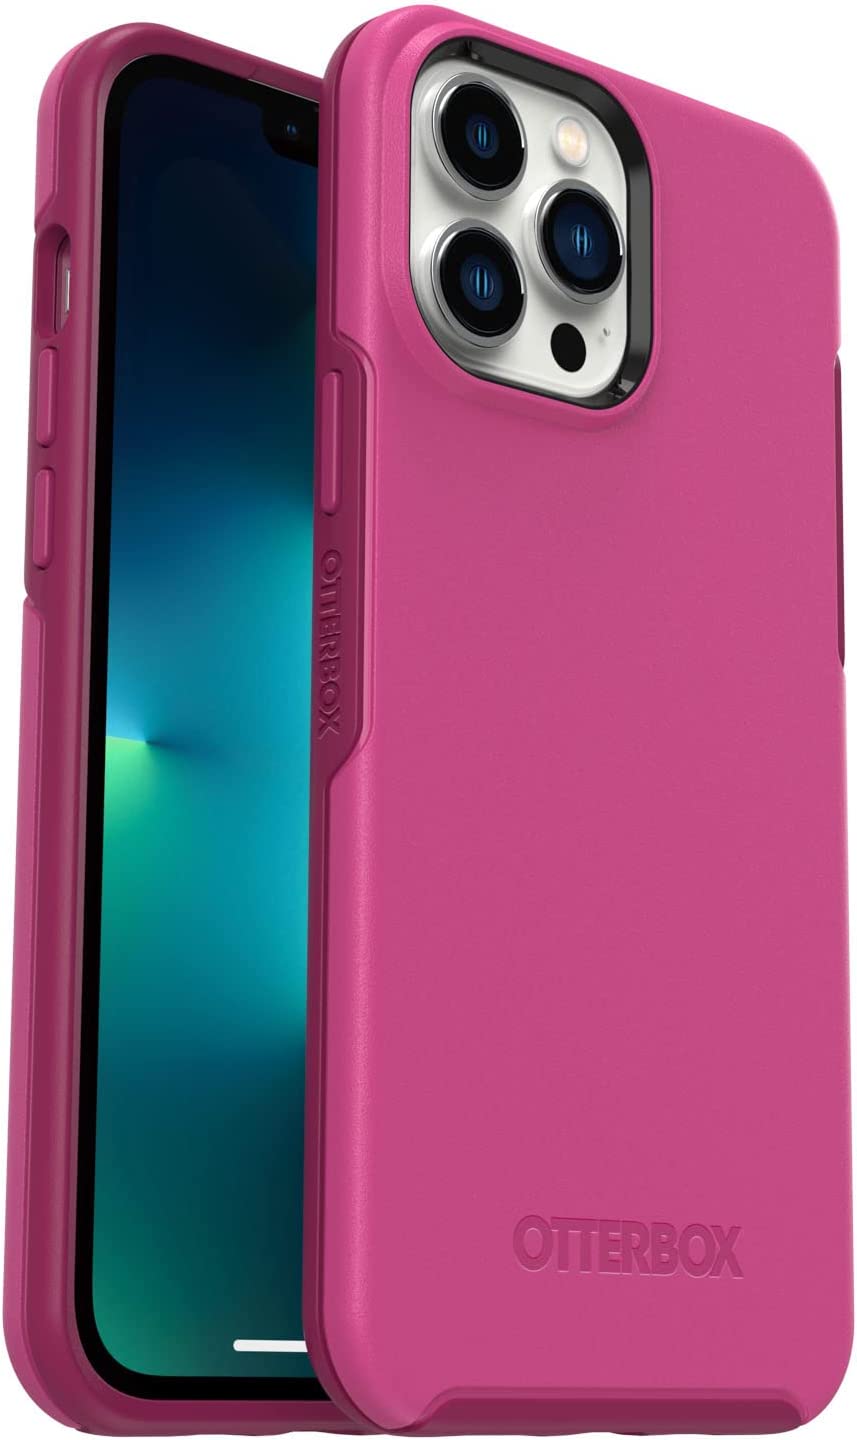 OtterBox SYMMETRY SERIES Case for Apple iPhone 12 Pro Max - Renaissance Pink (Certified Refurbished)